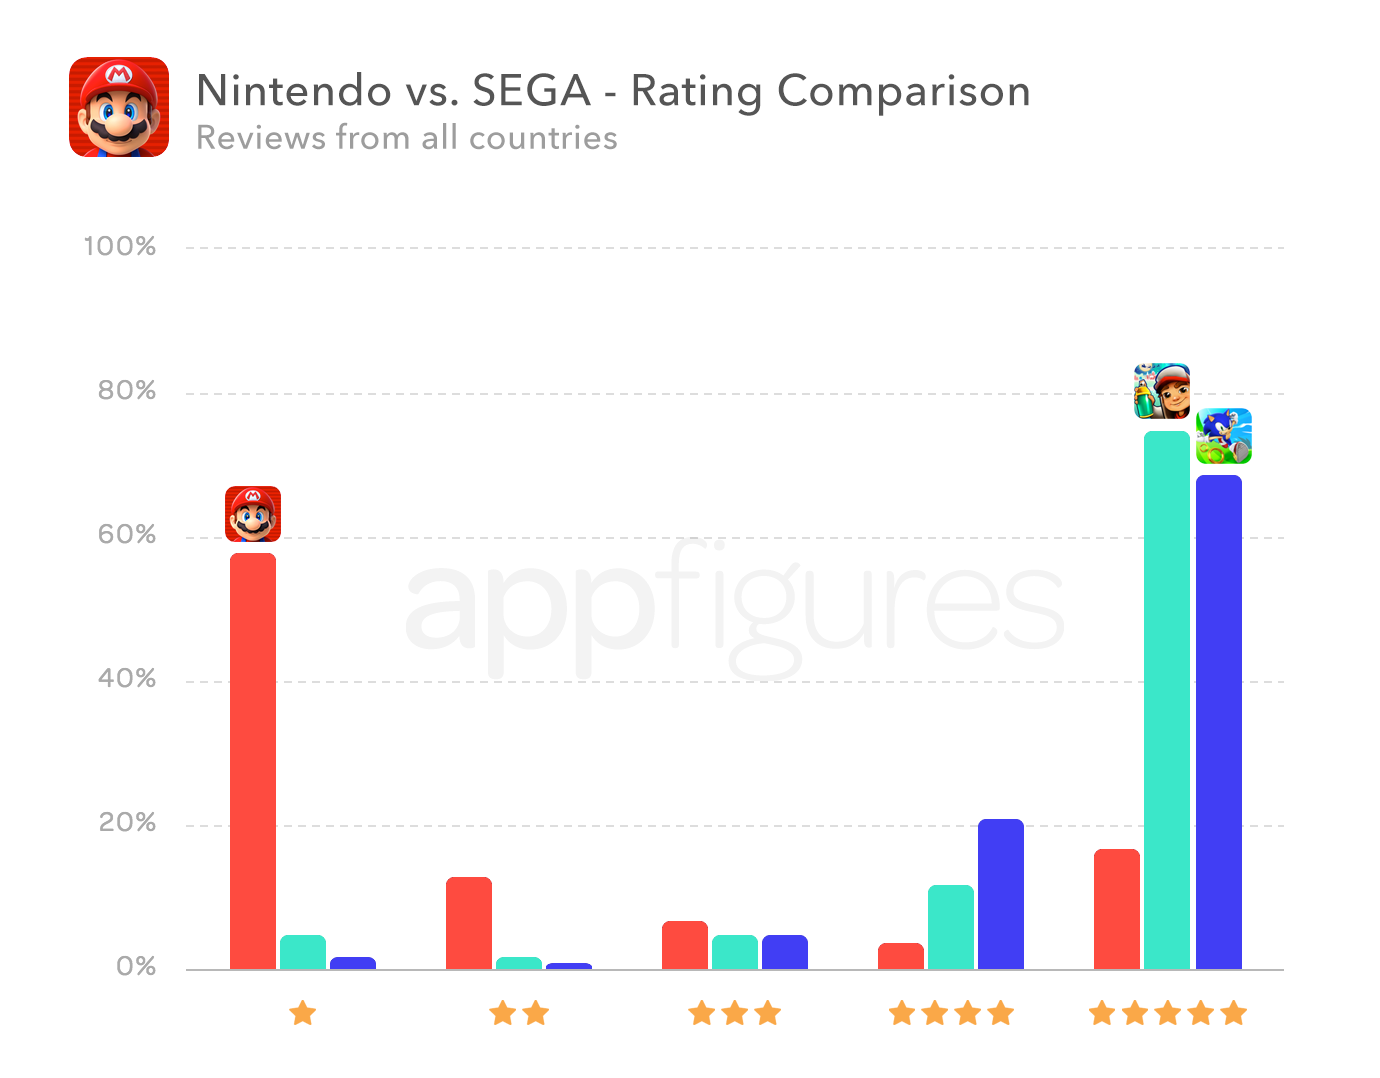 What Went Wrong With Super Mario Run — Analysis of 120,000+ Reviews by appfigures